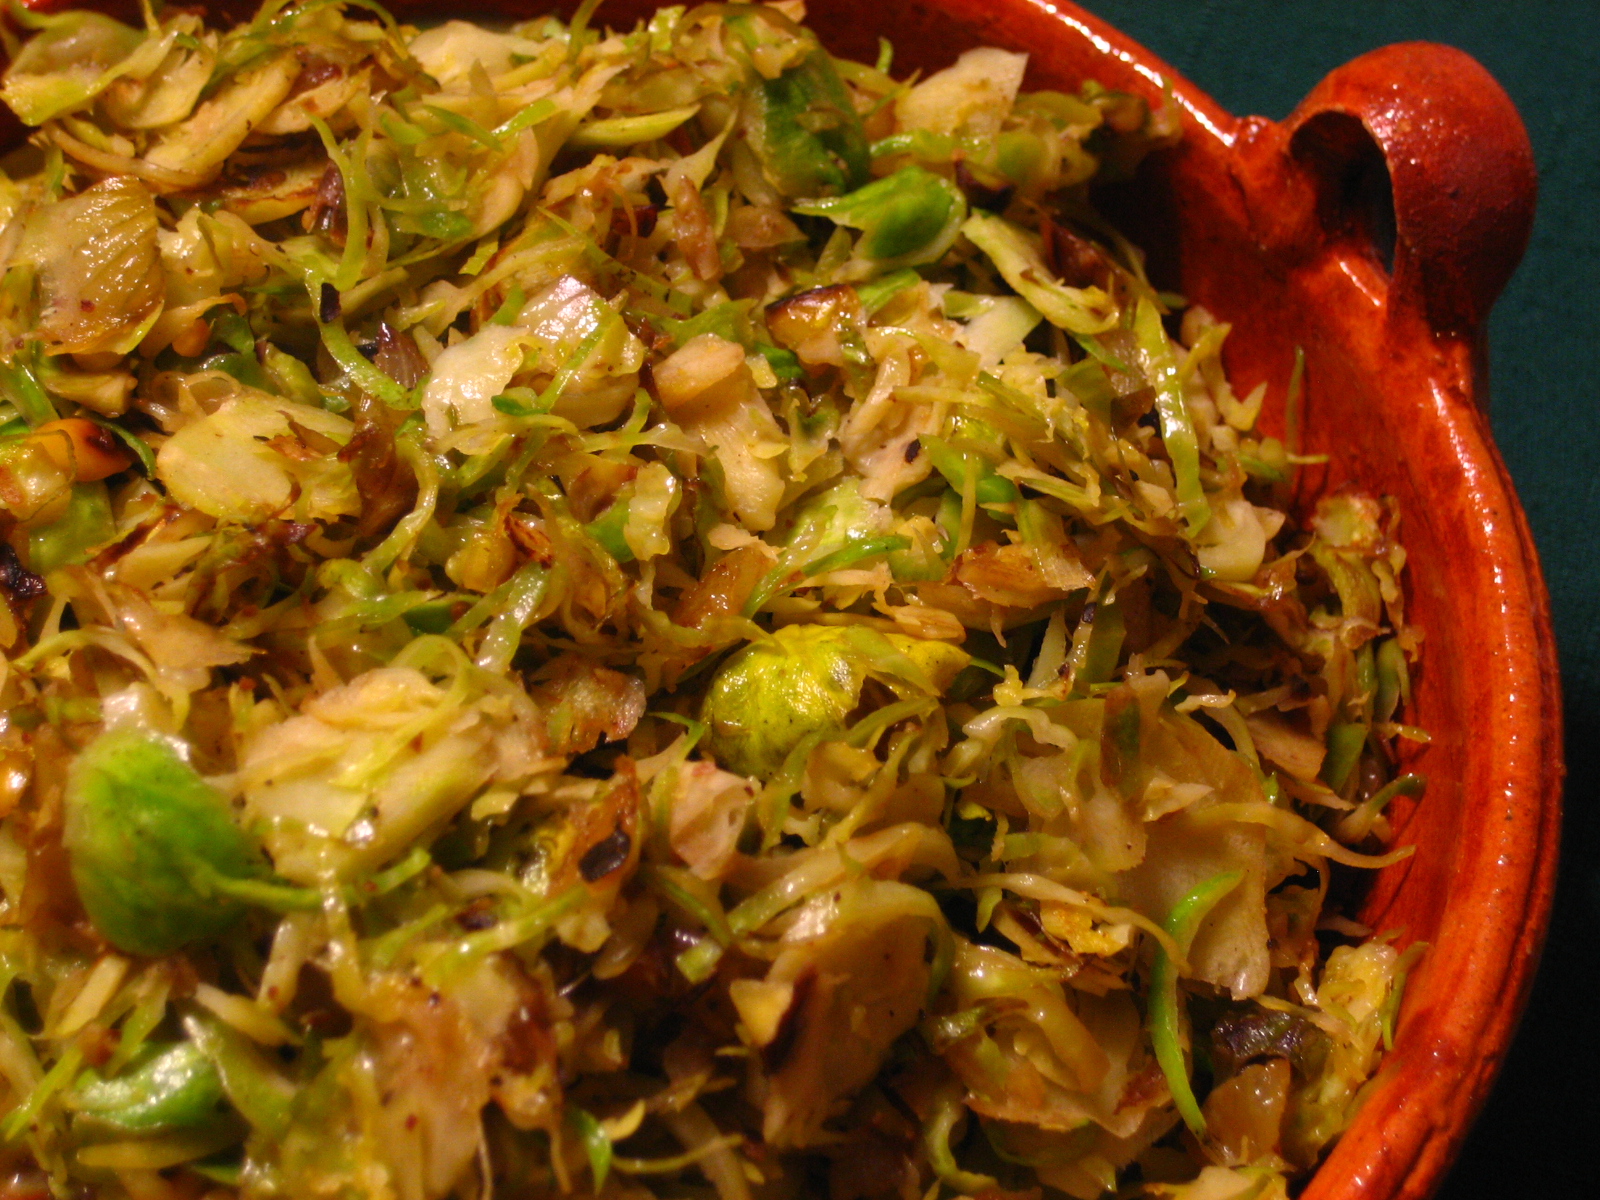 [sauteed+brussels+sprouts+with+pistachios.JPG]